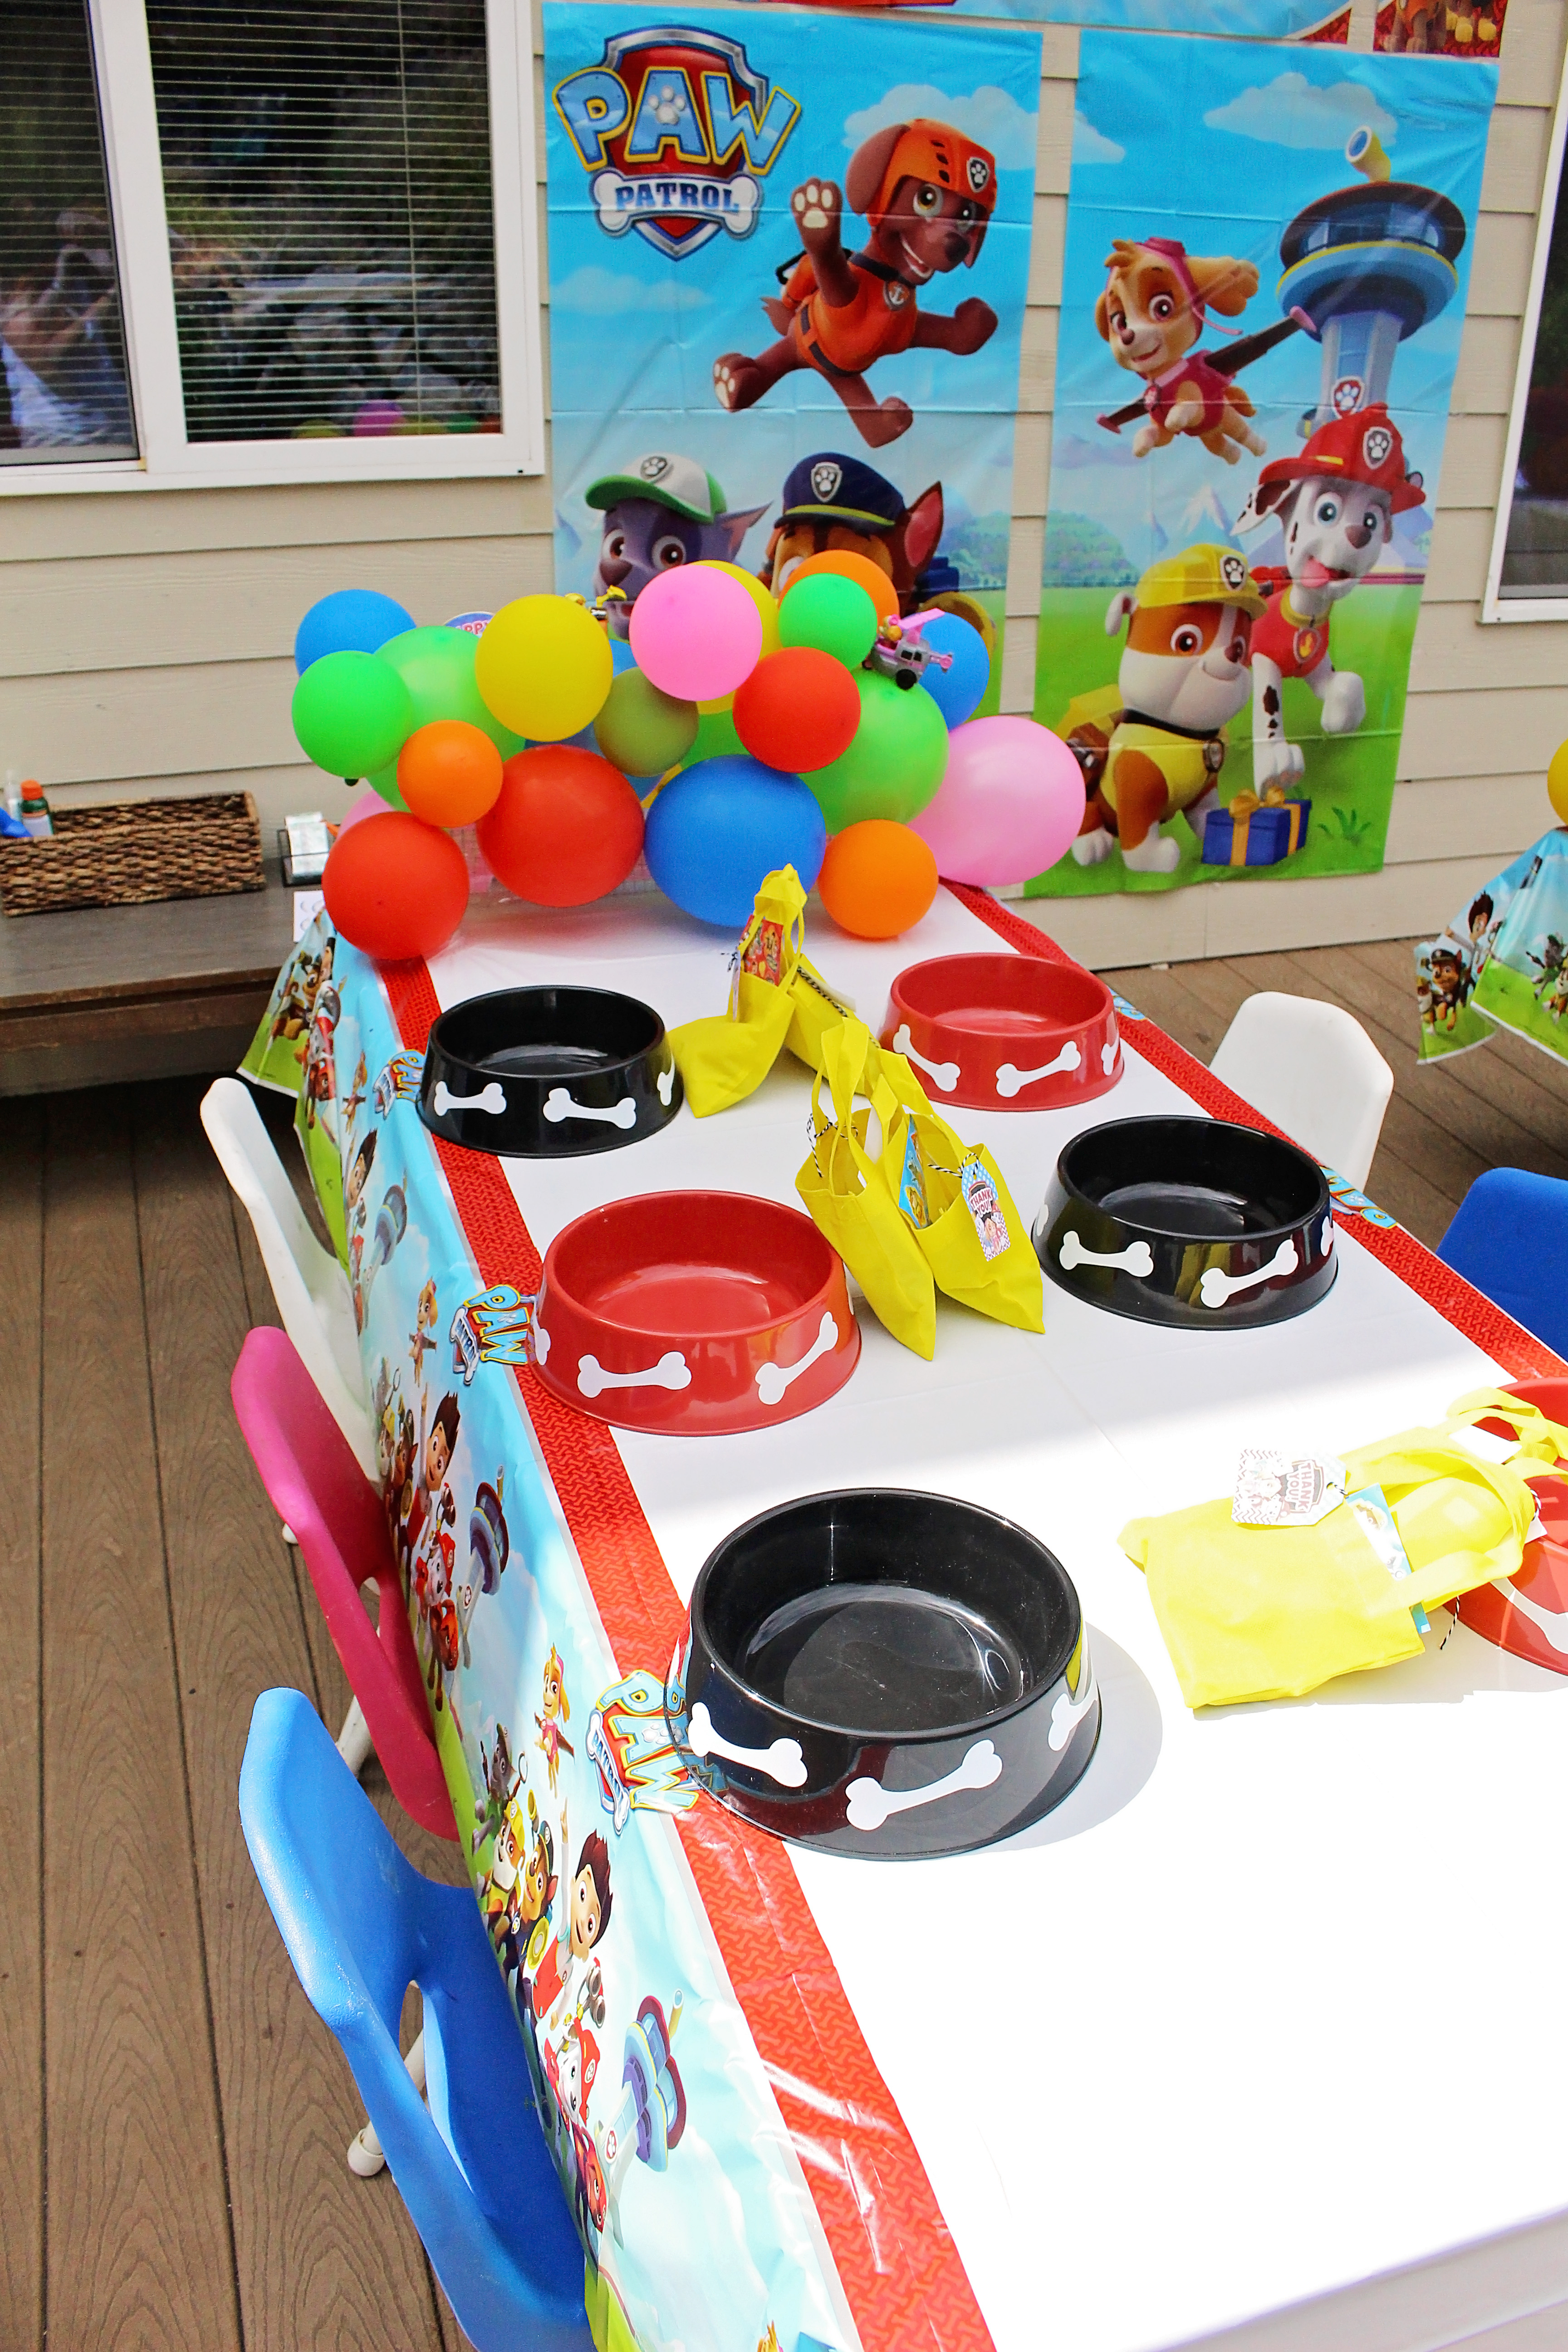 Paw Patrol Party Ideas from A Well Crafted Party